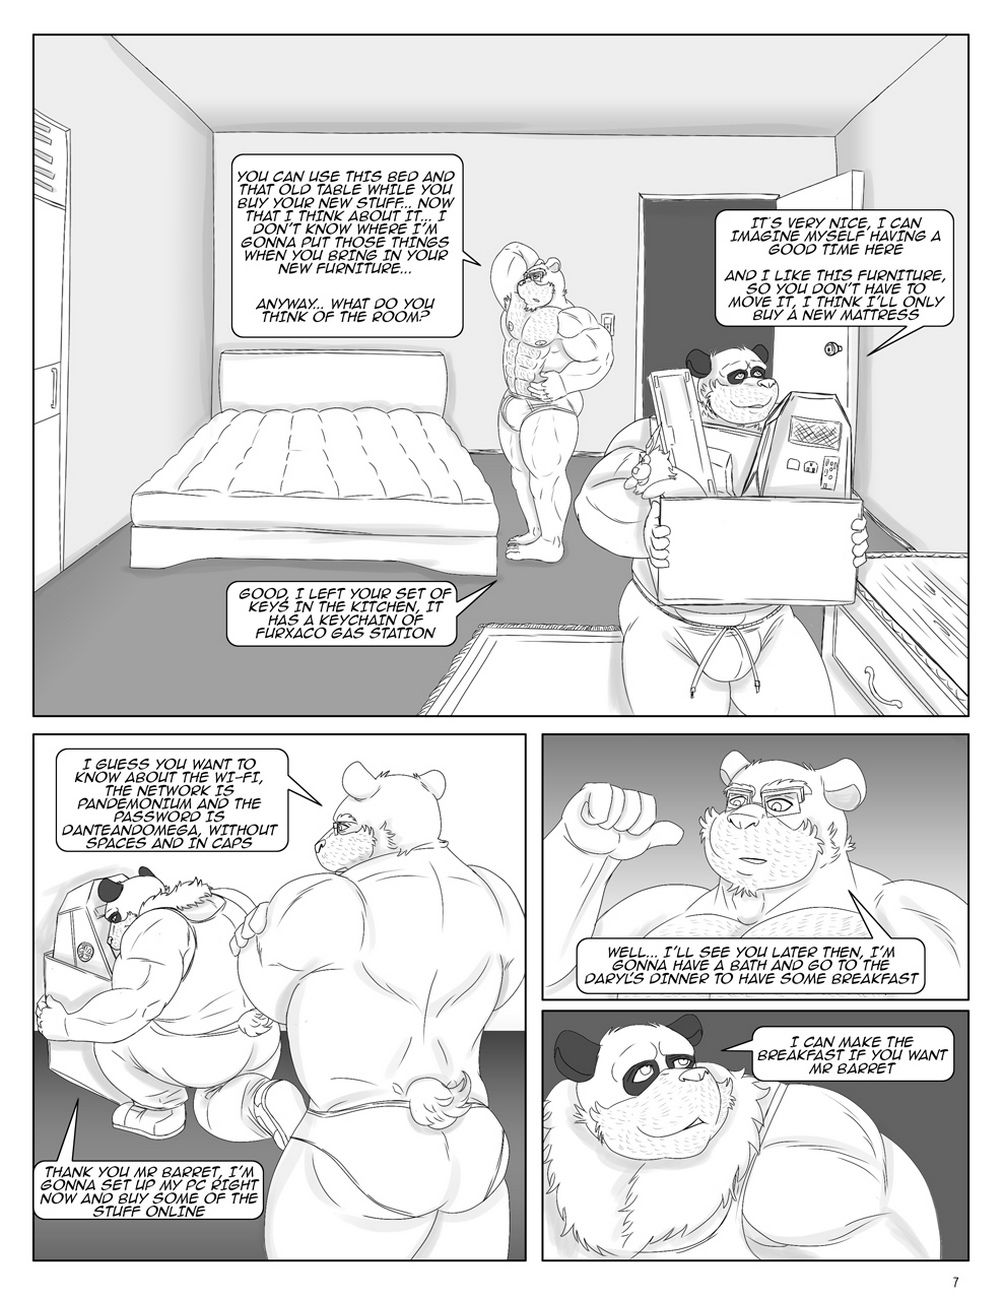 World Is Made By Bears 1 - The New Toy page 8